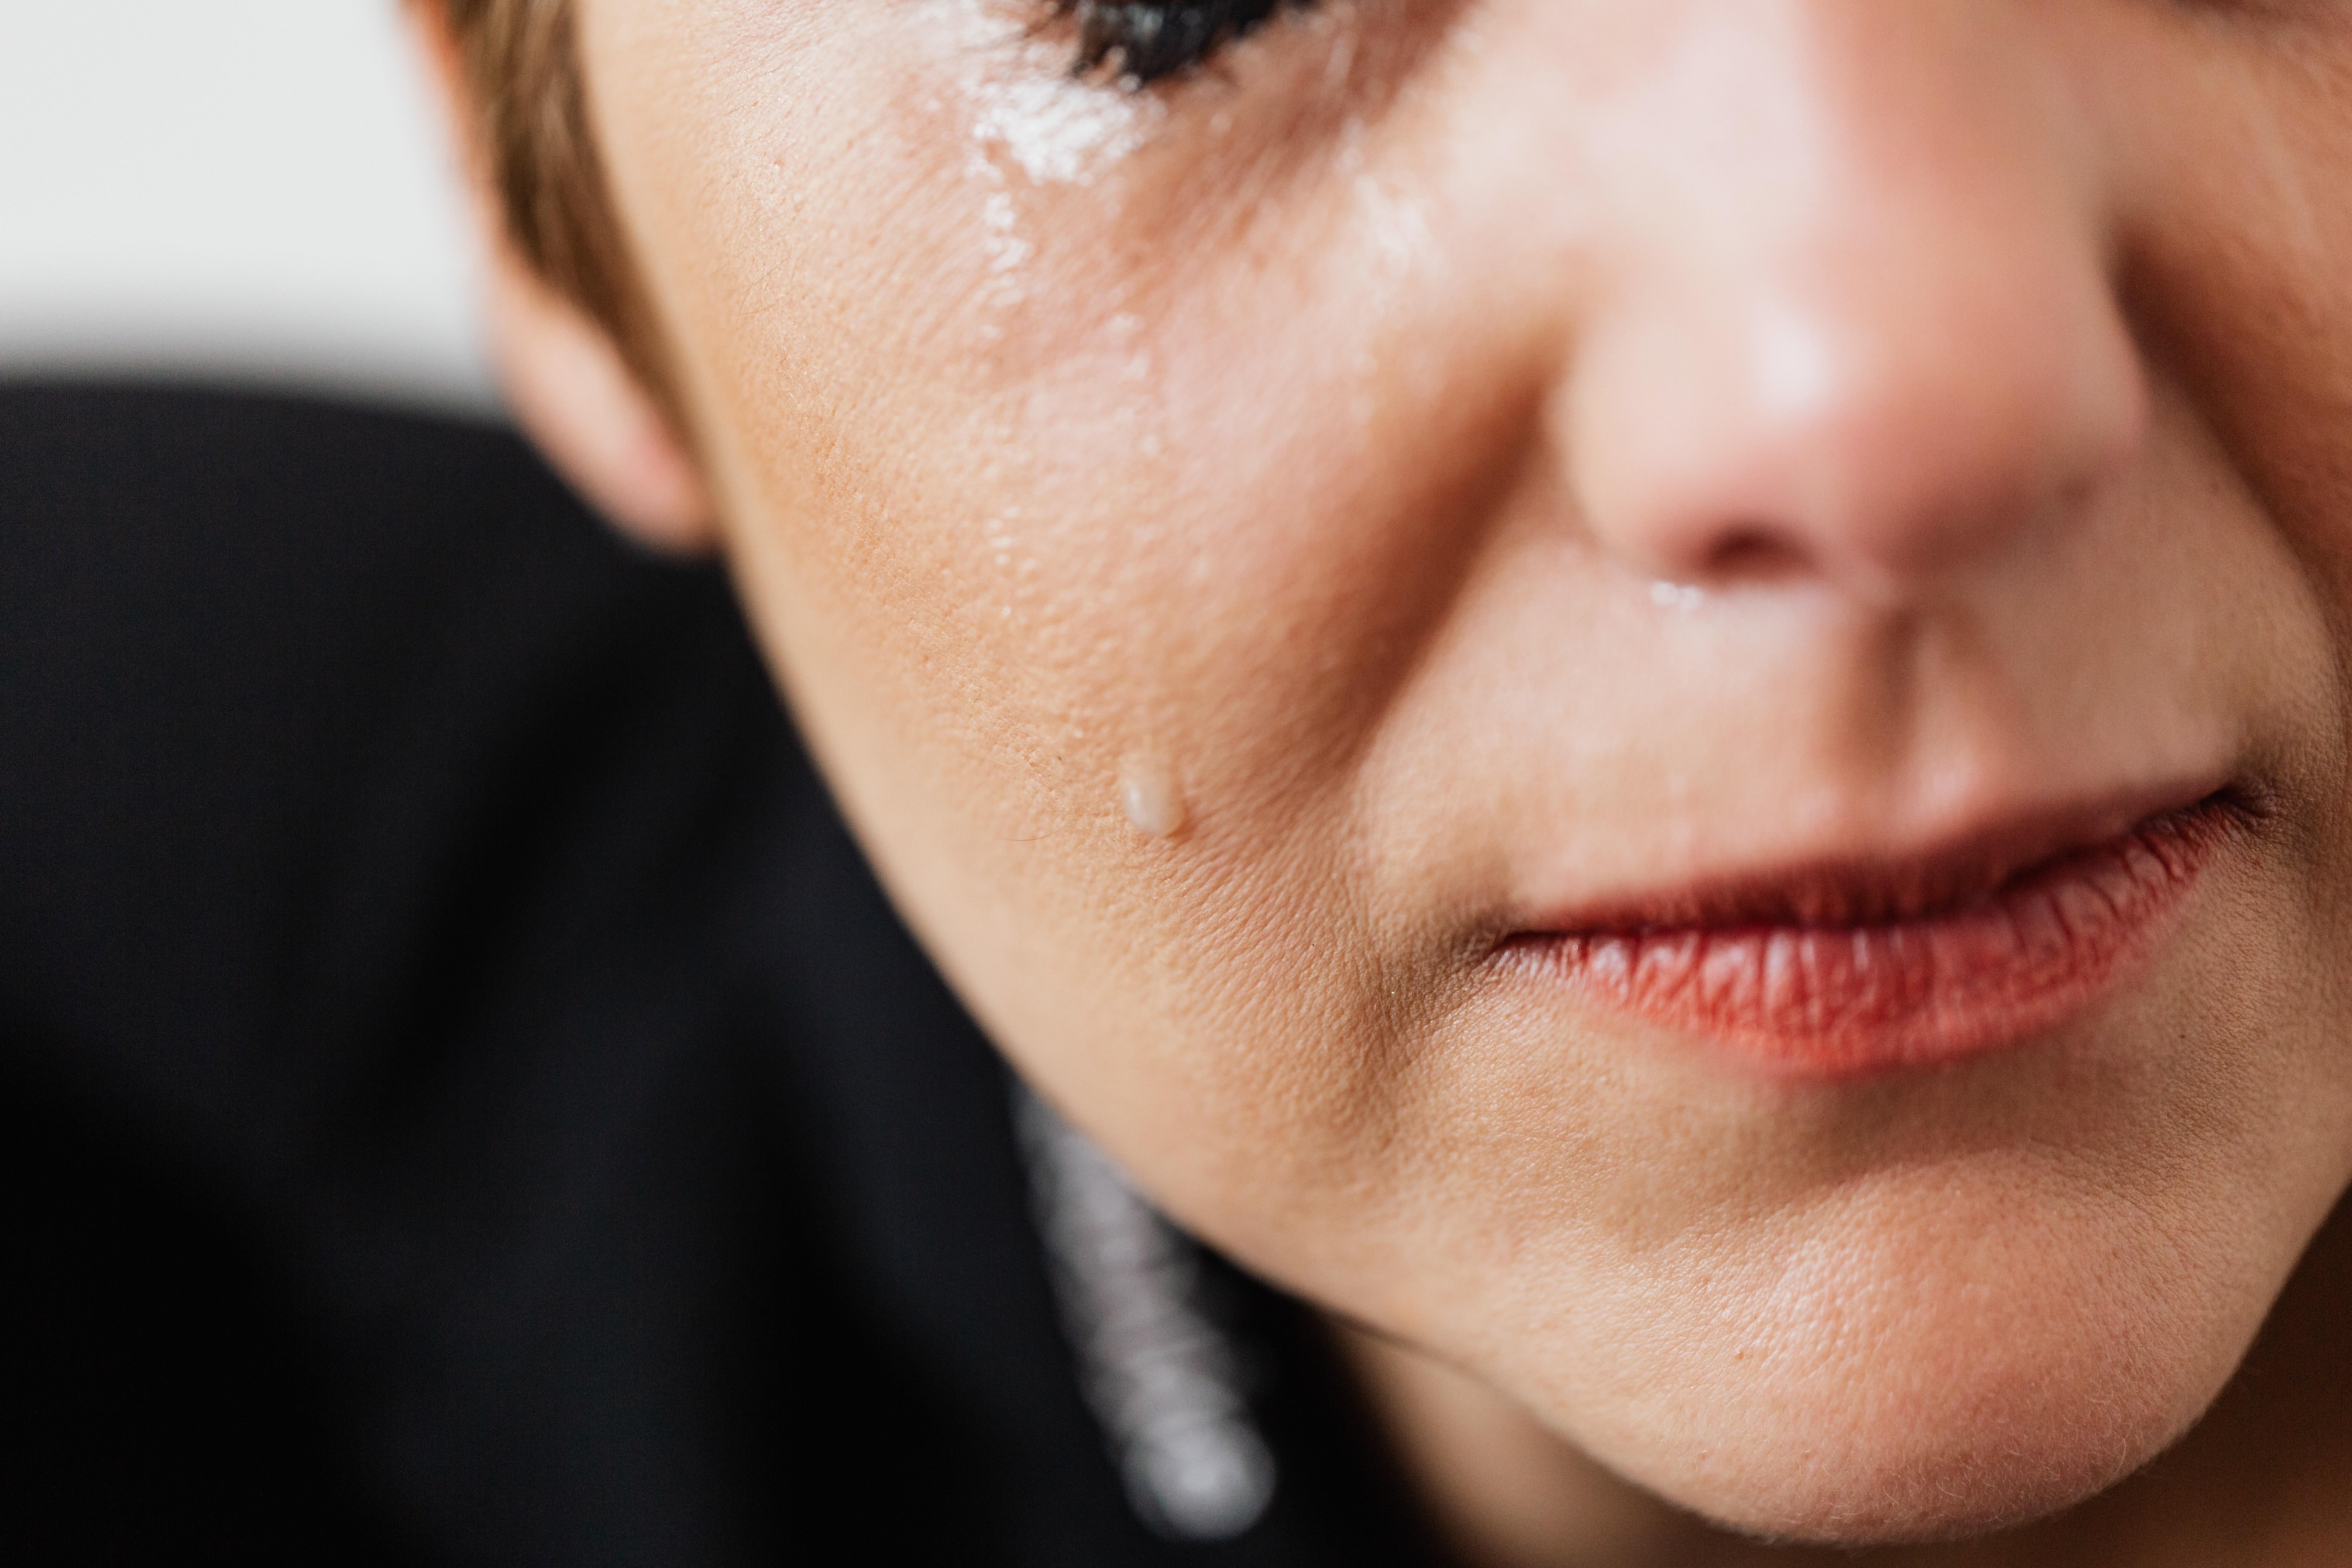 Middle aged woman crying | Source: Pexels